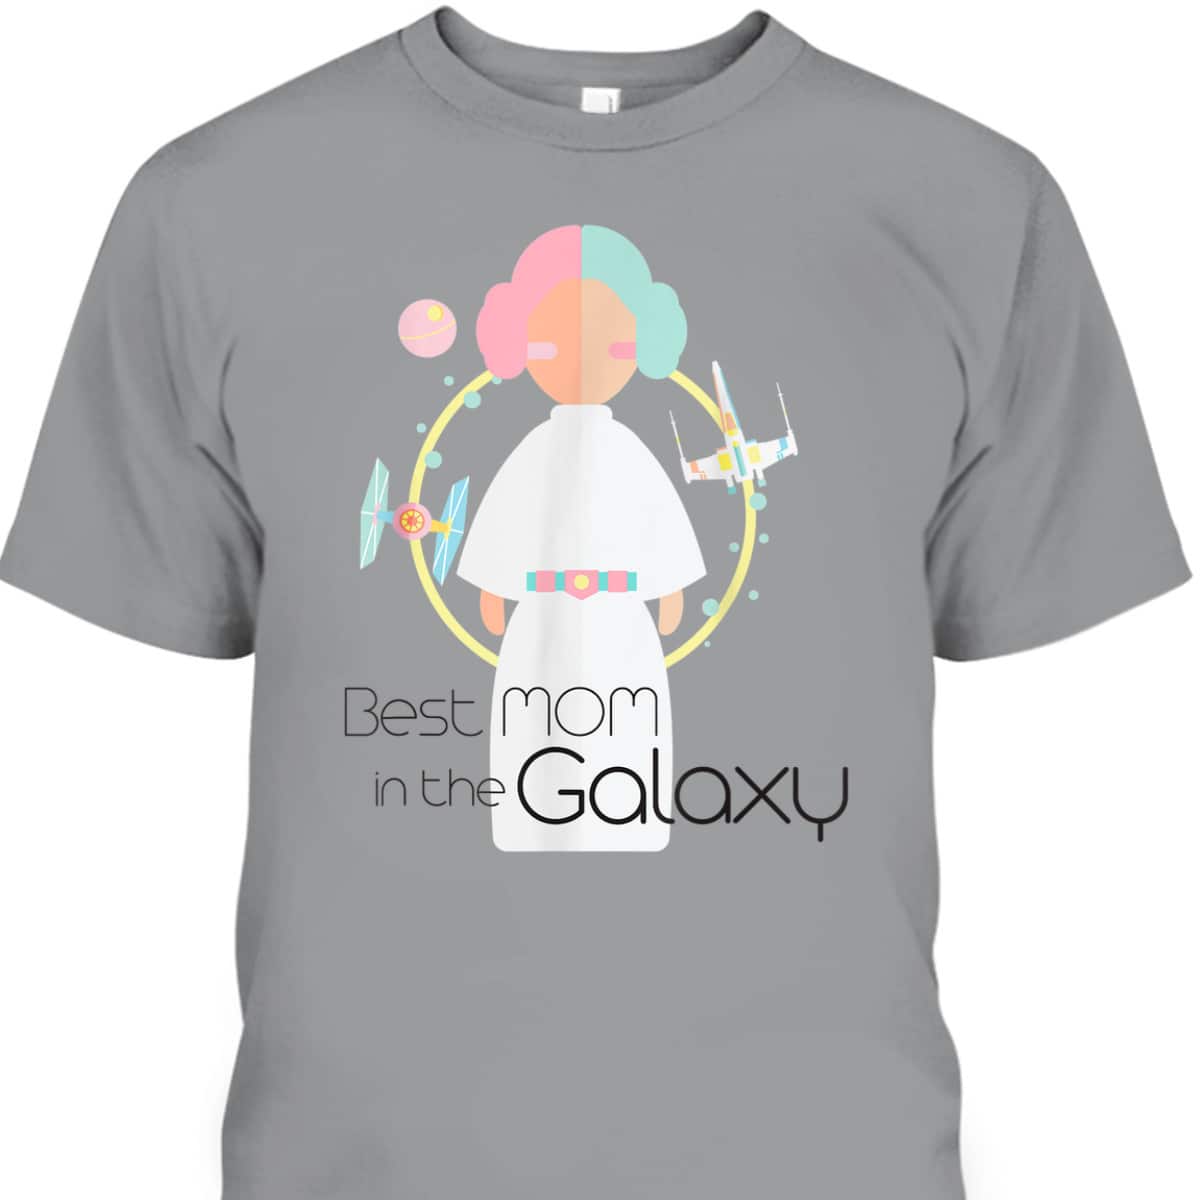 Mother's Day T-Shirt Star Wars Princess Leia Best Mom In The Galaxy